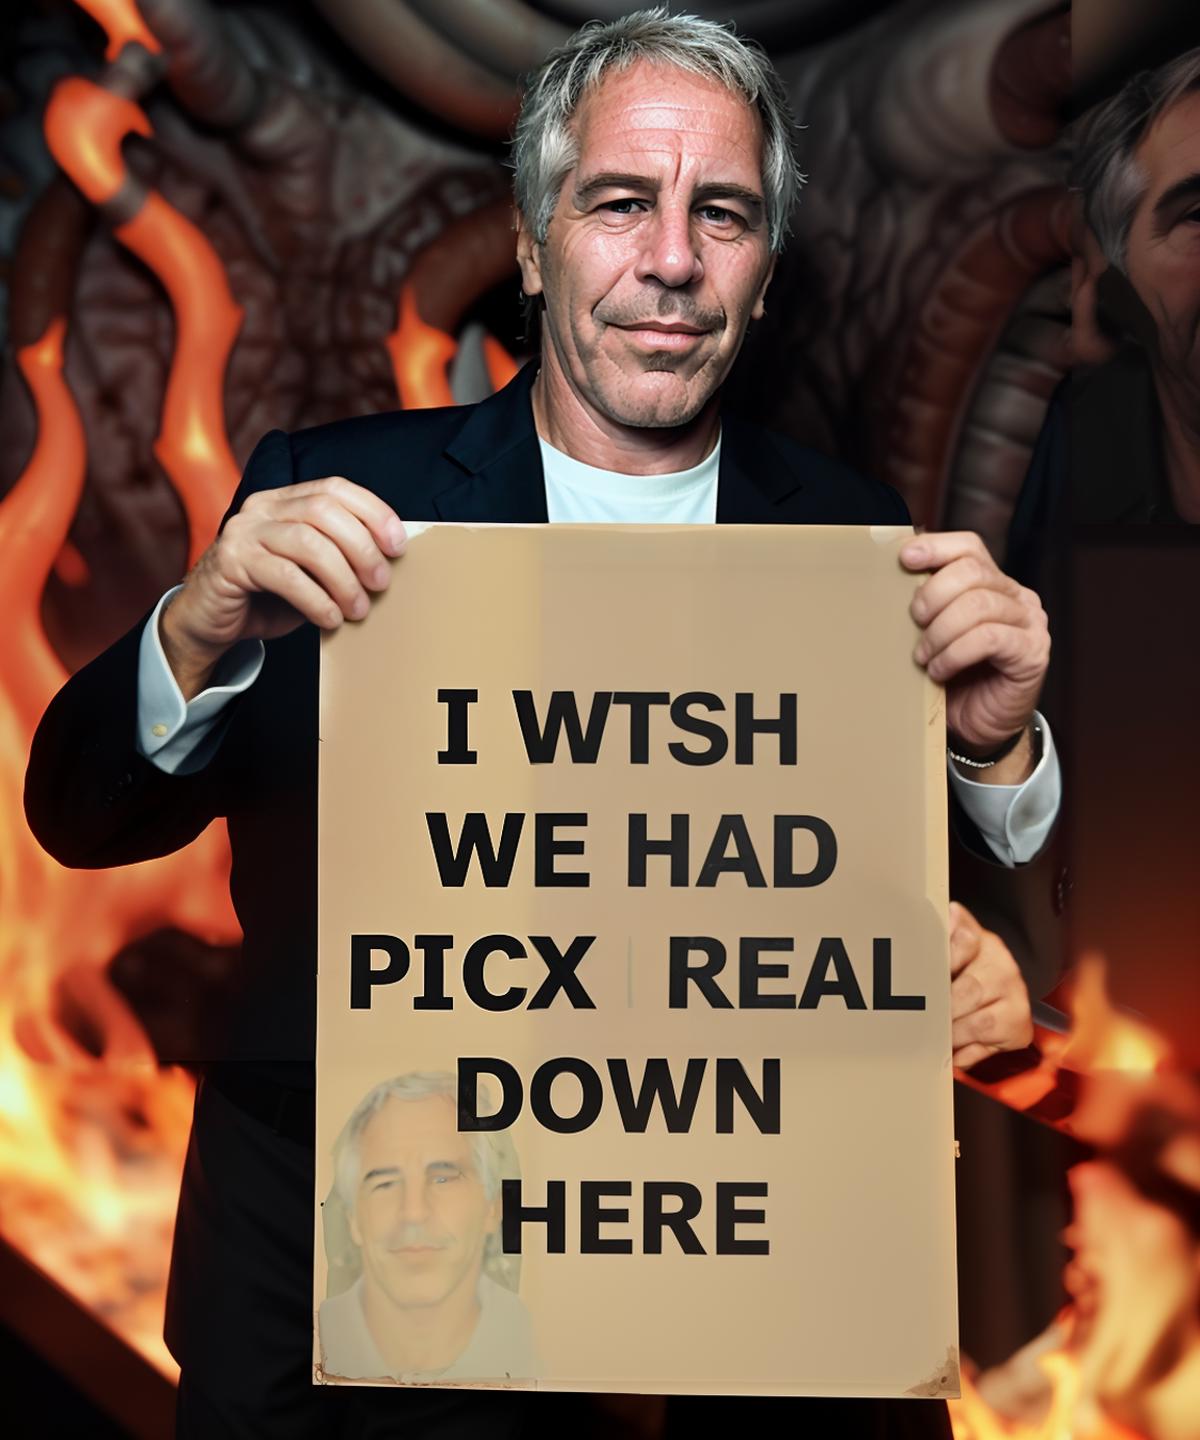 Man holding a sign that says "I wish we had picked real down here".